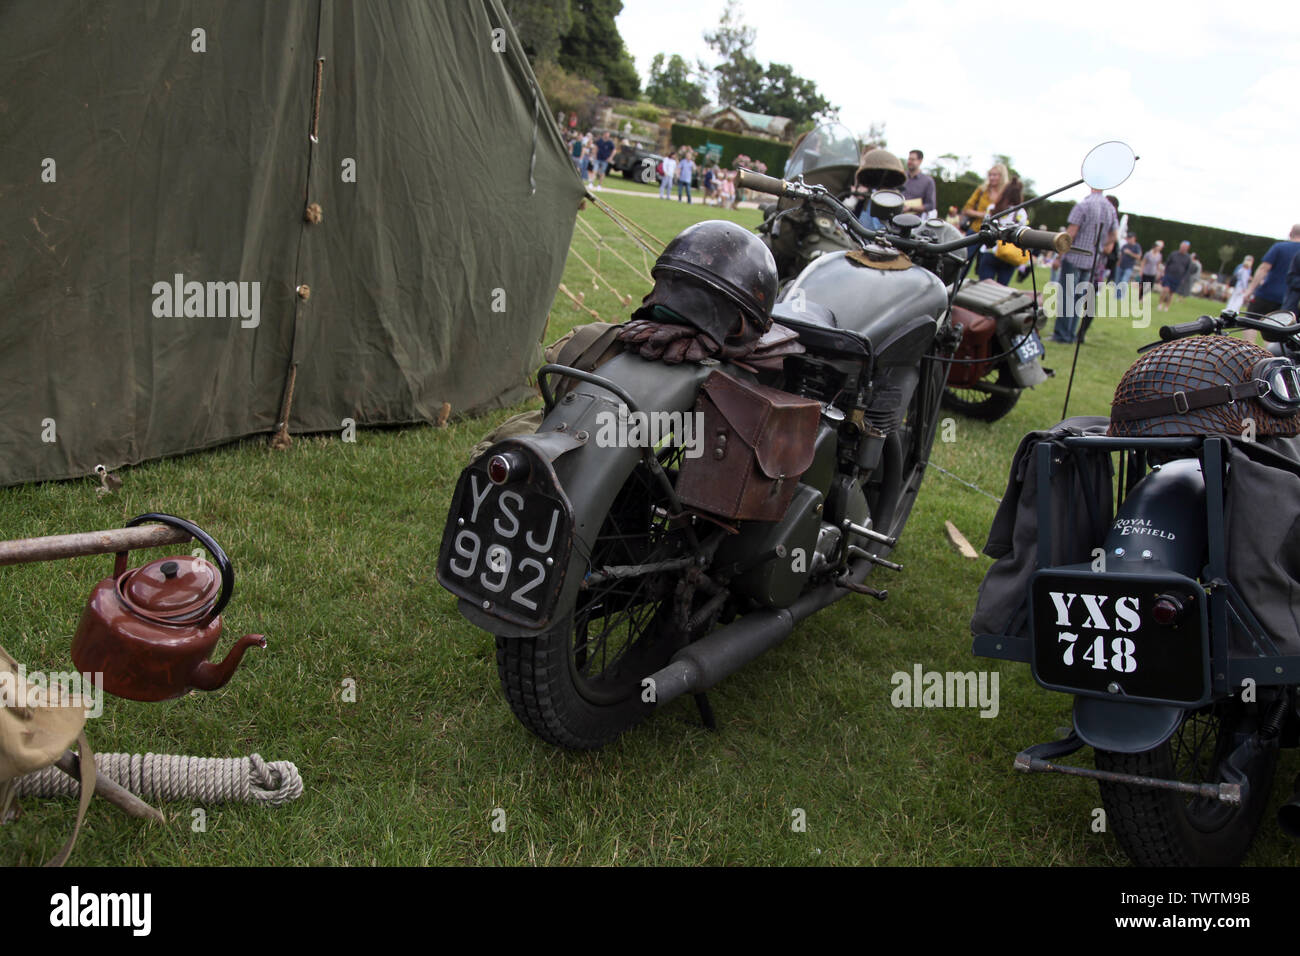 Two military motorbikes parked outside a tent, a blue Royal Enfield motorcycle and a green BSA M20 motorcycle on display at military event Stock Photo